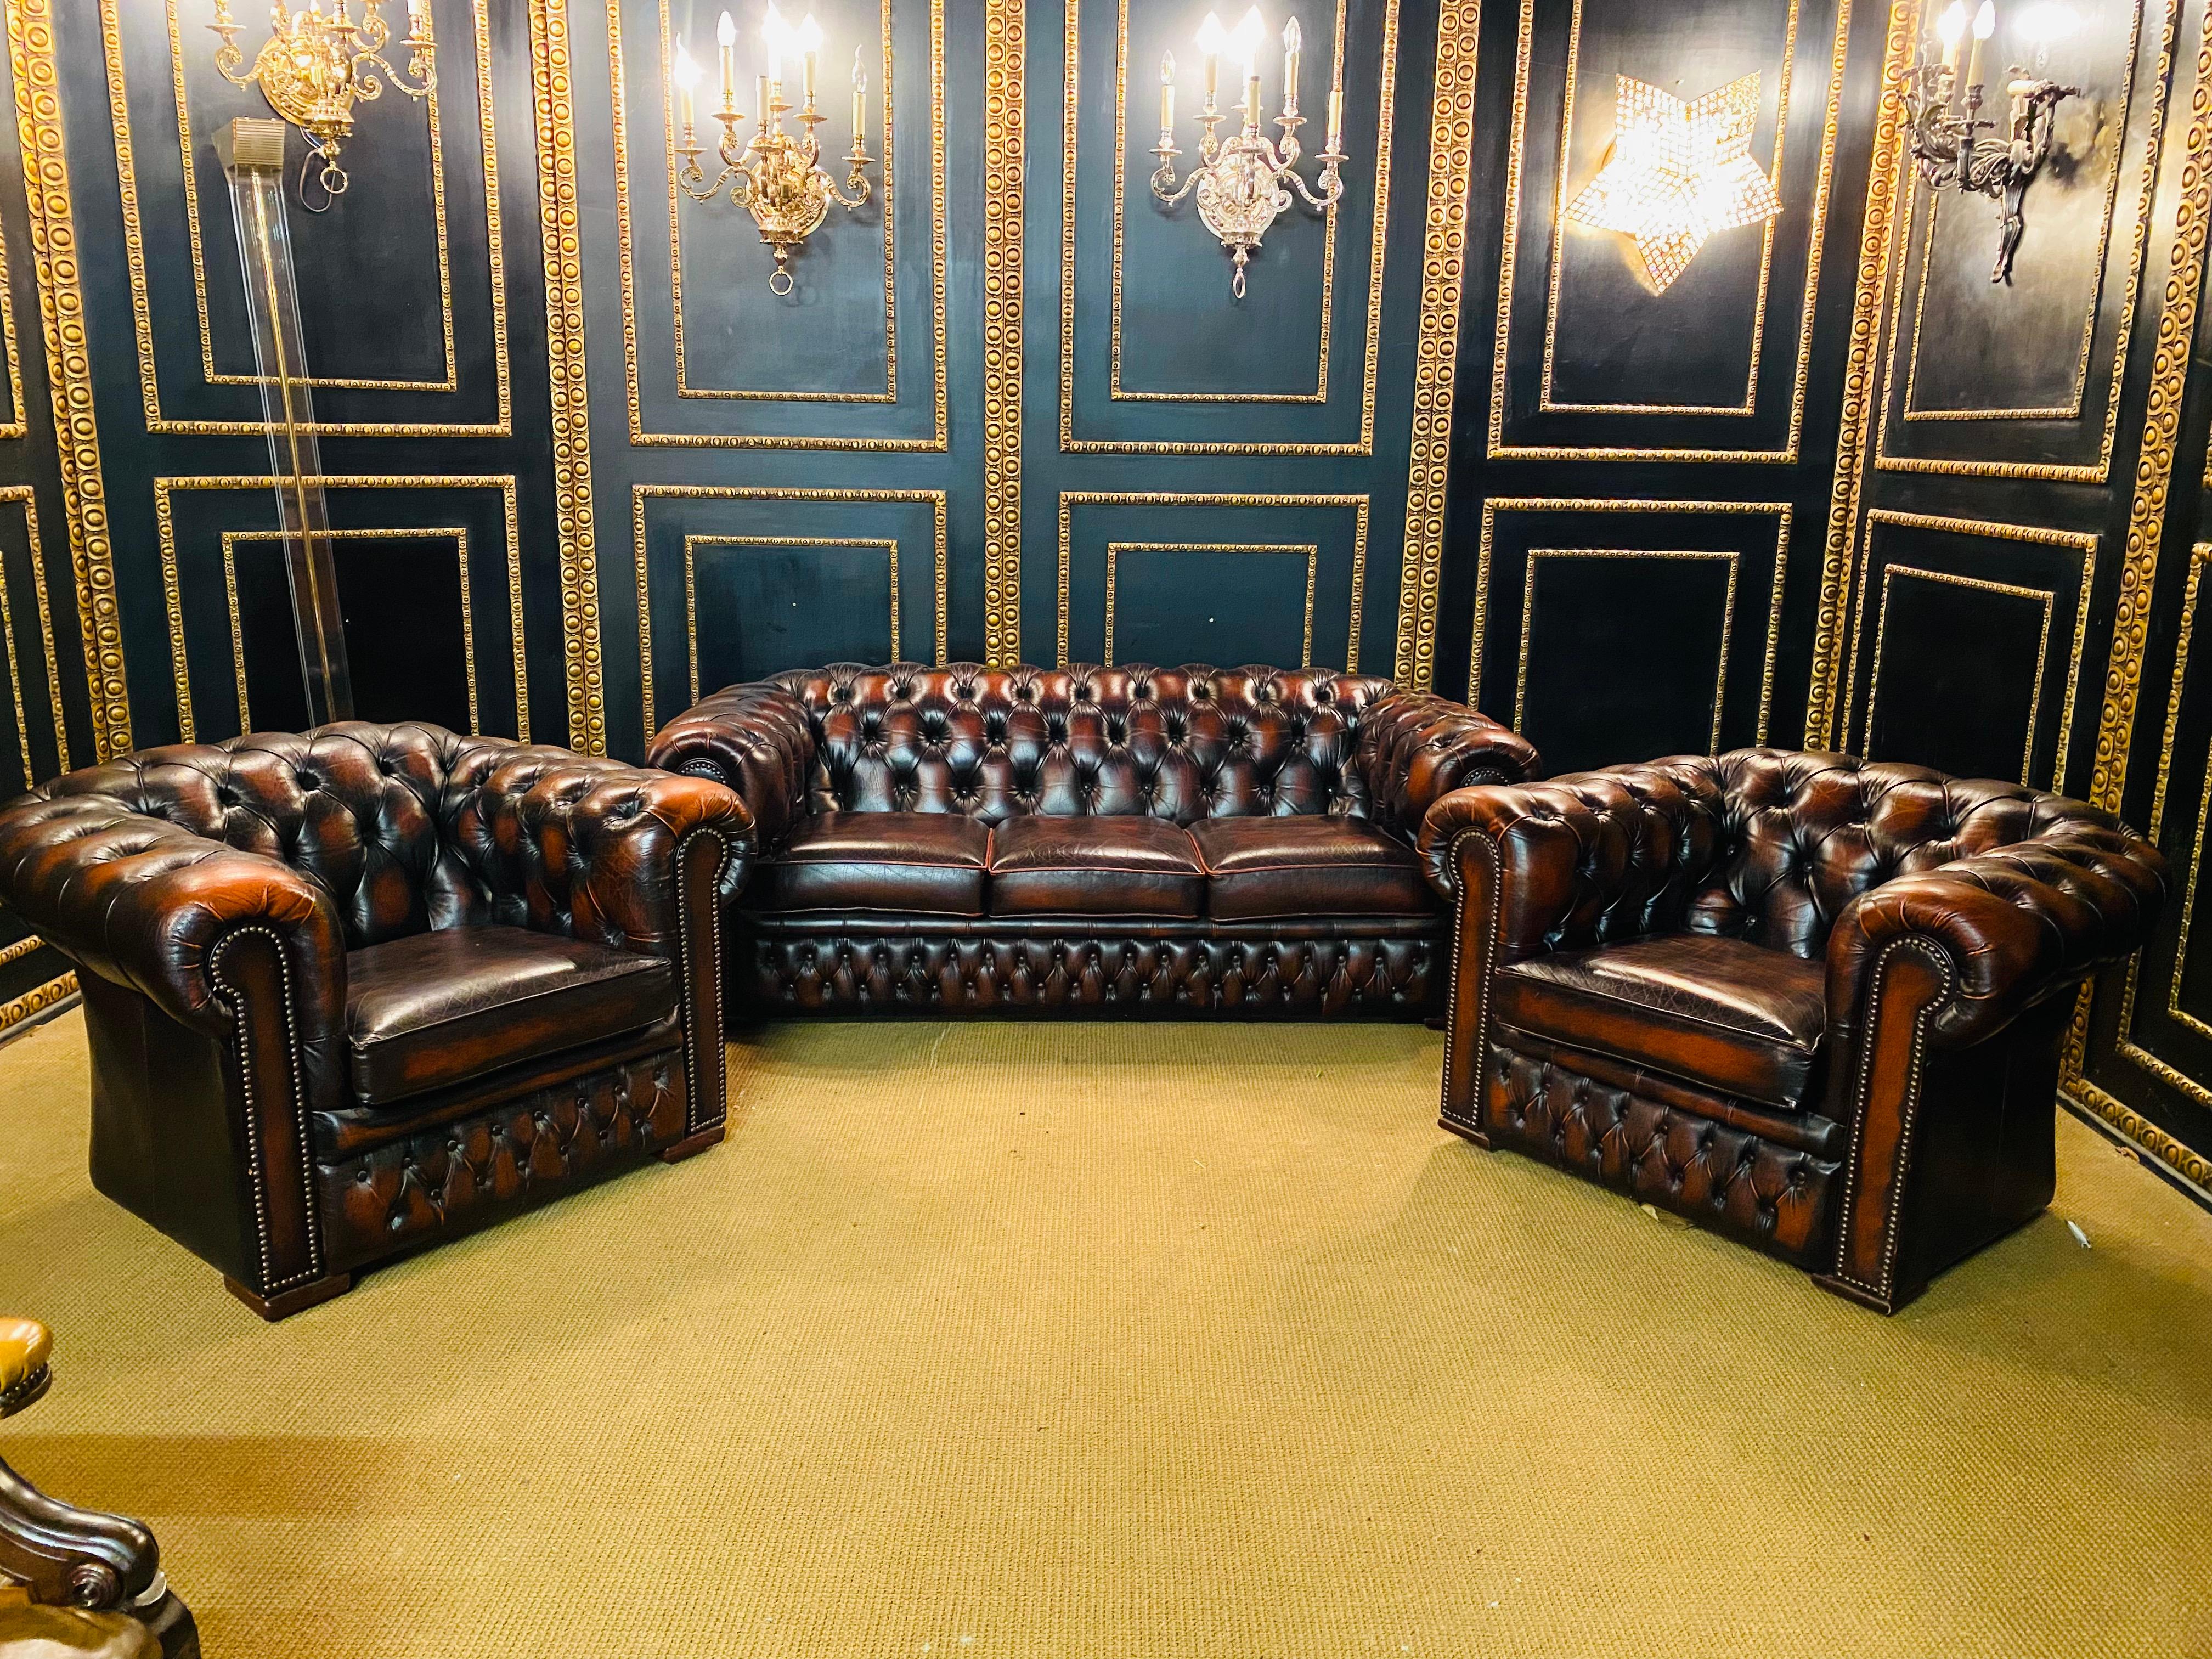 Very well-kept Chesterfield setl. This model was made by the company Centurion, the company is a traditional manufactory which is known for its quality.The Set is in a vintage condition.
But over the years it has Gotten a bit more character. We